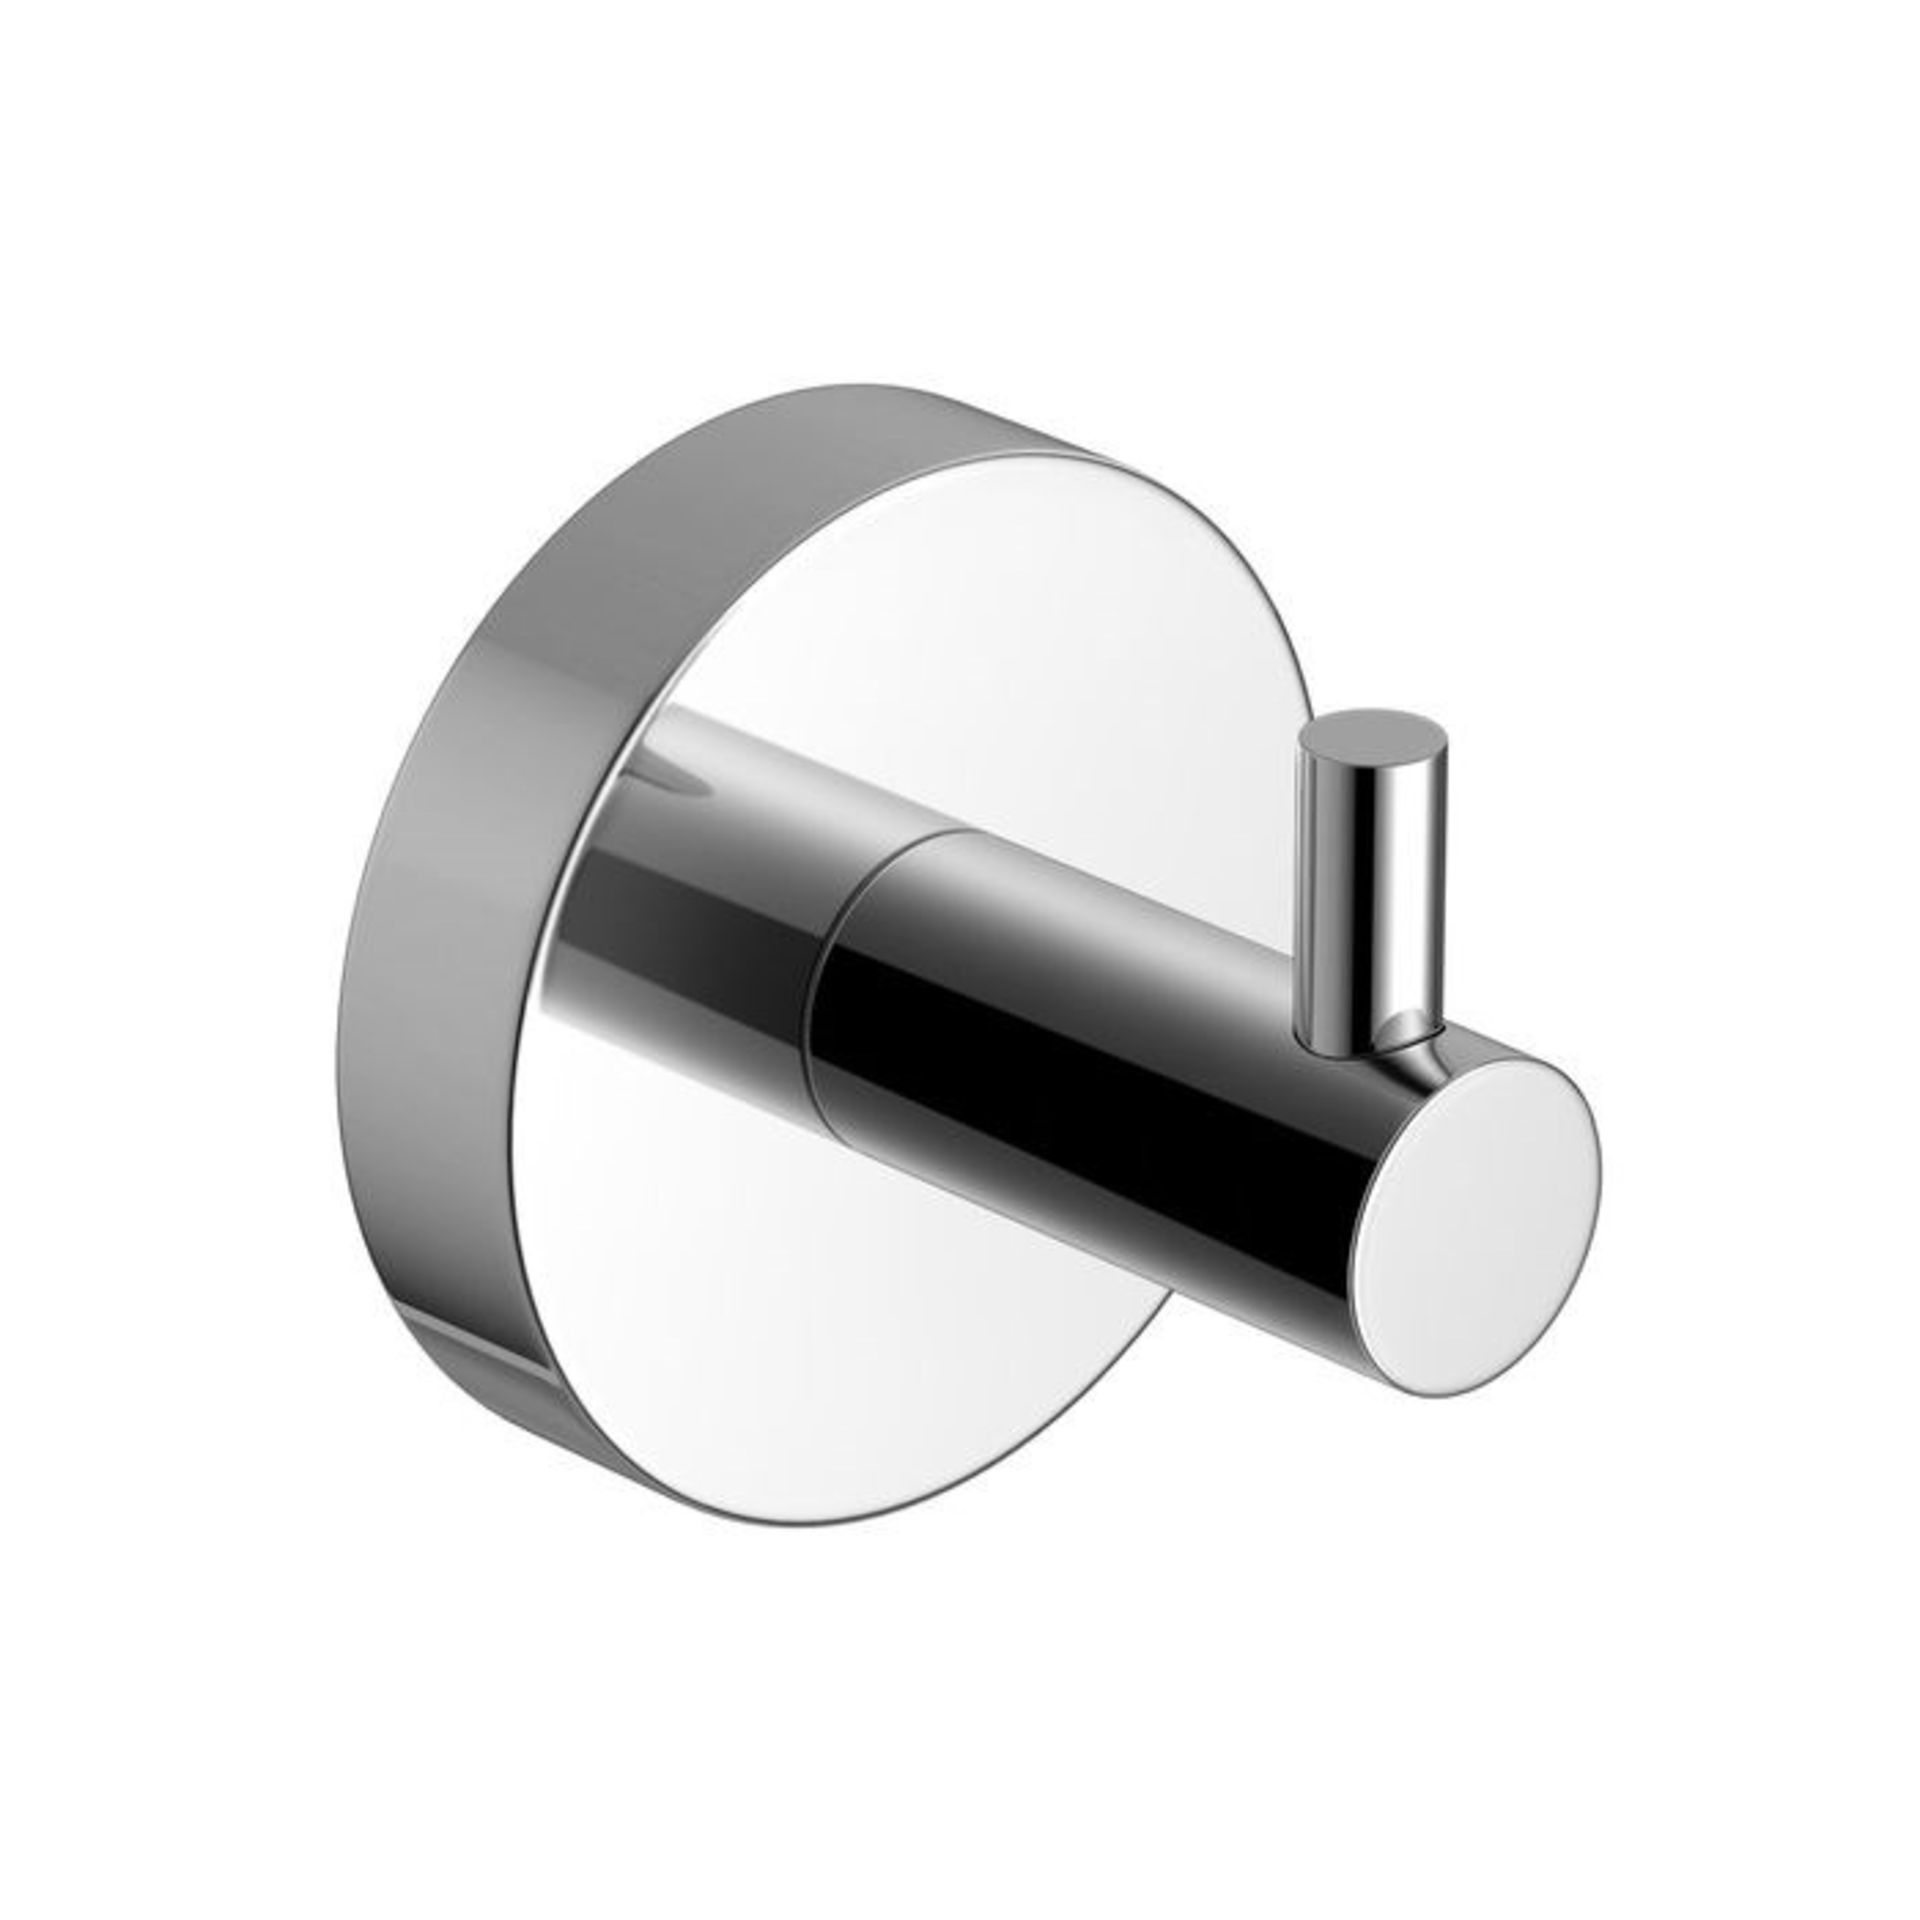 (QT1000) Finsbury Robe Hook. Finishes your bathroom with a little extra functionality and style... - Image 4 of 6